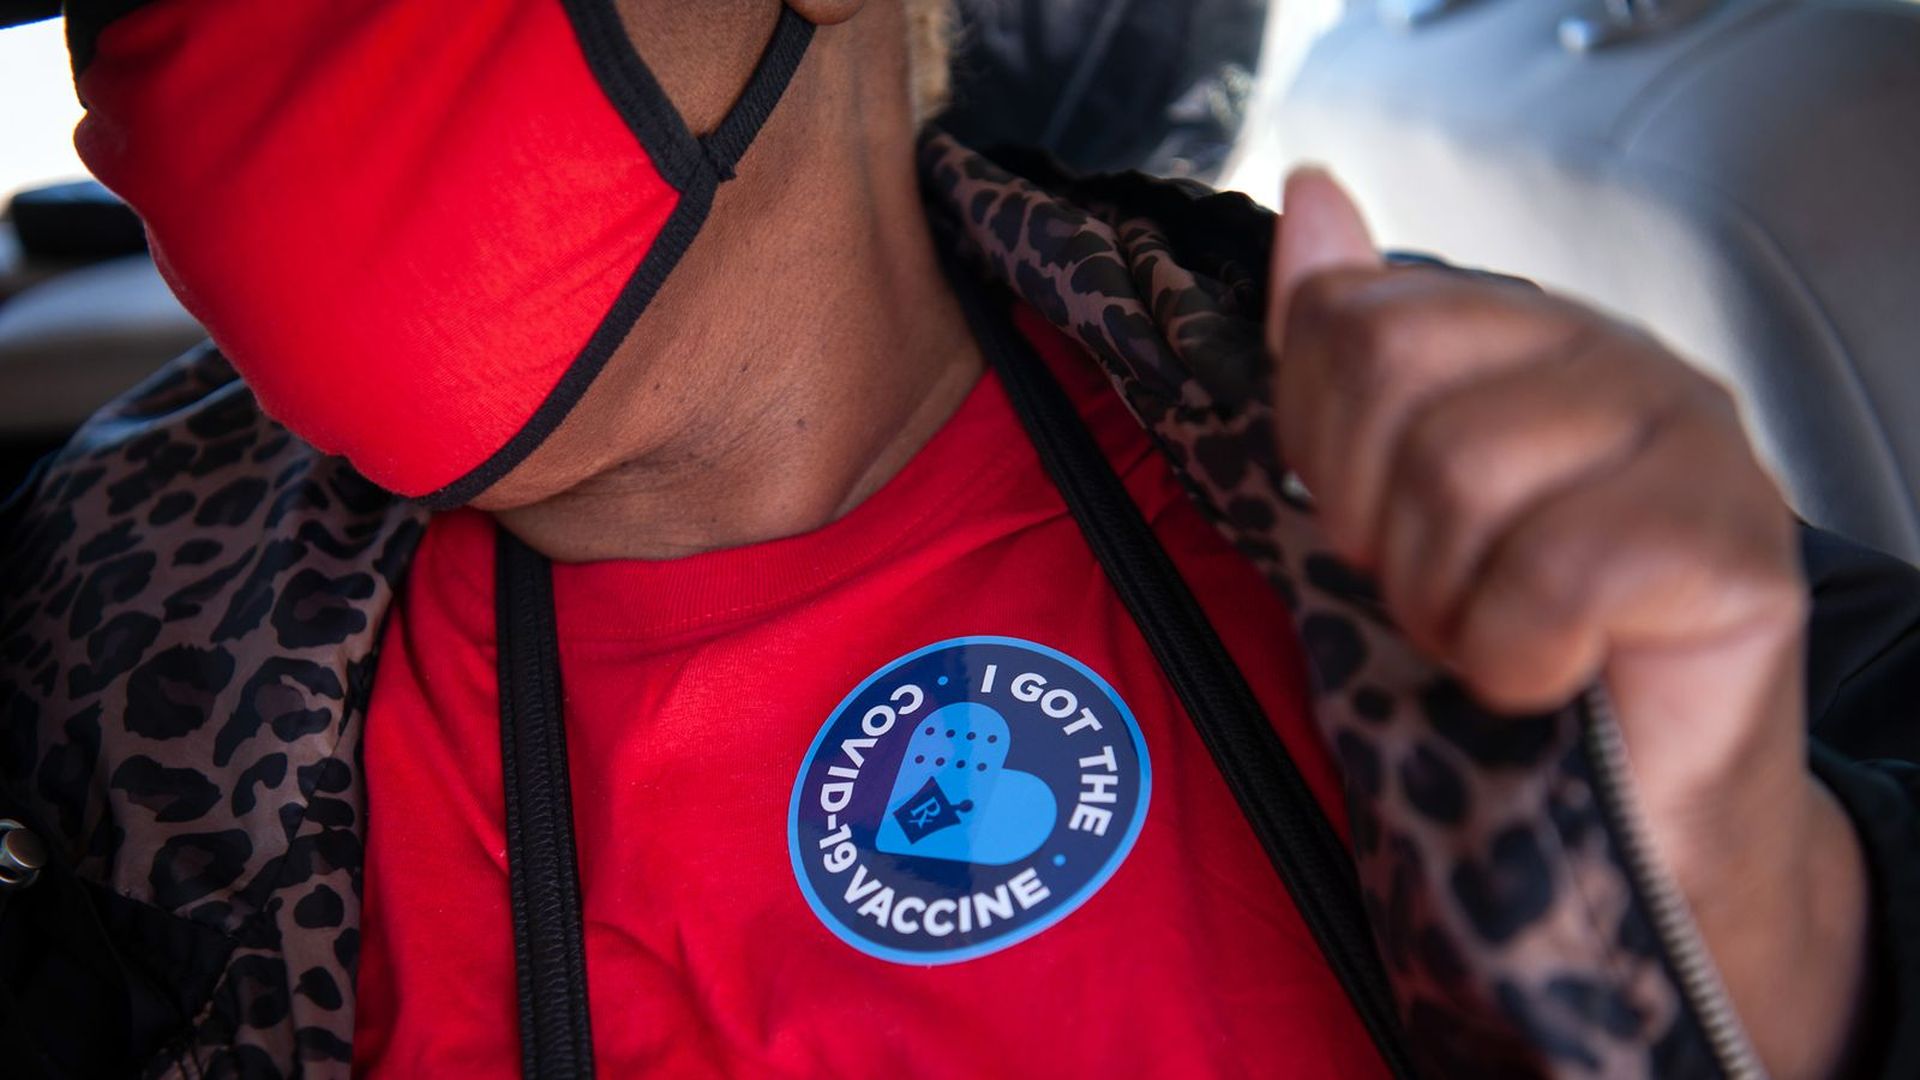 A person displays a sticker after receiving a COVID-19 vaccine at a medical clinic.